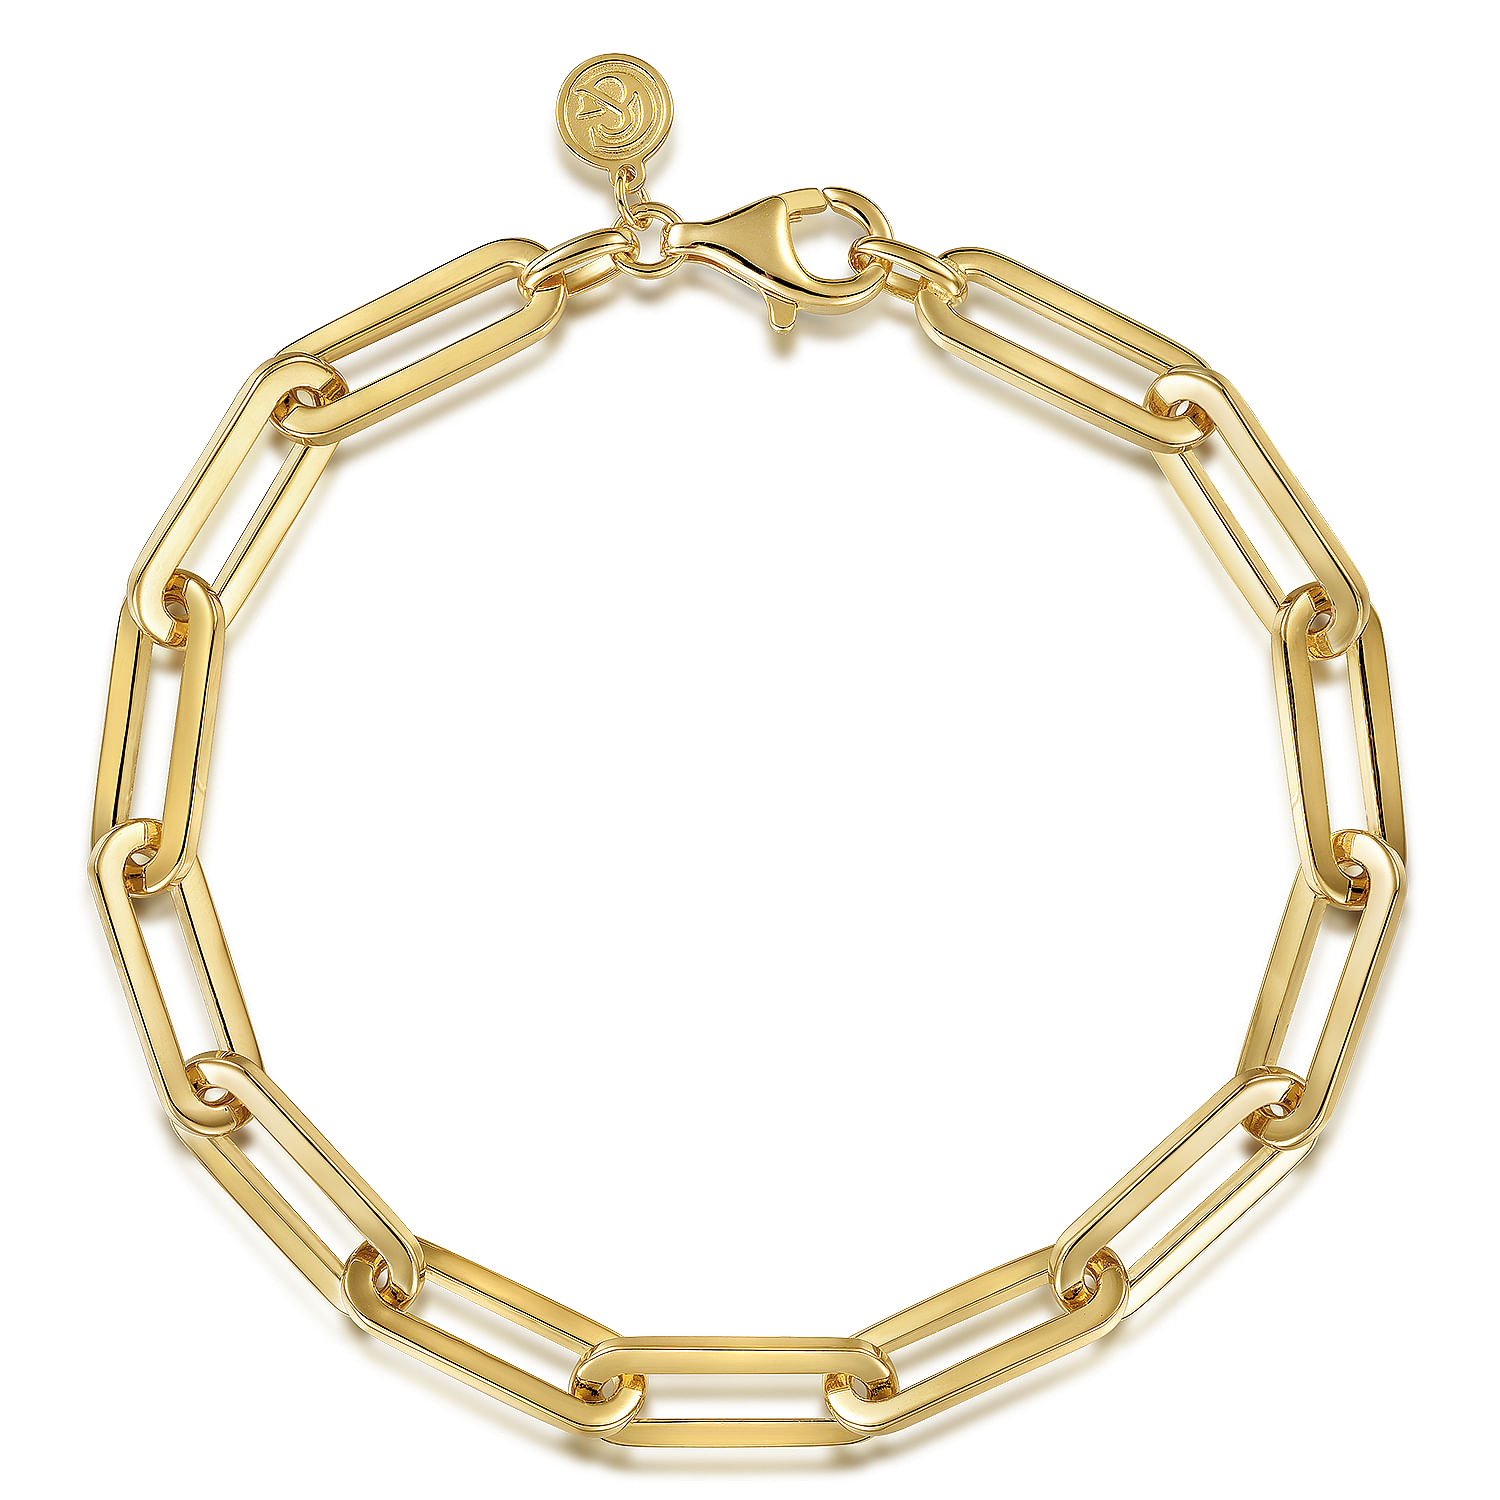 8 inch 14K Yellow Gold Hollow Paperclip Chain Bracelet